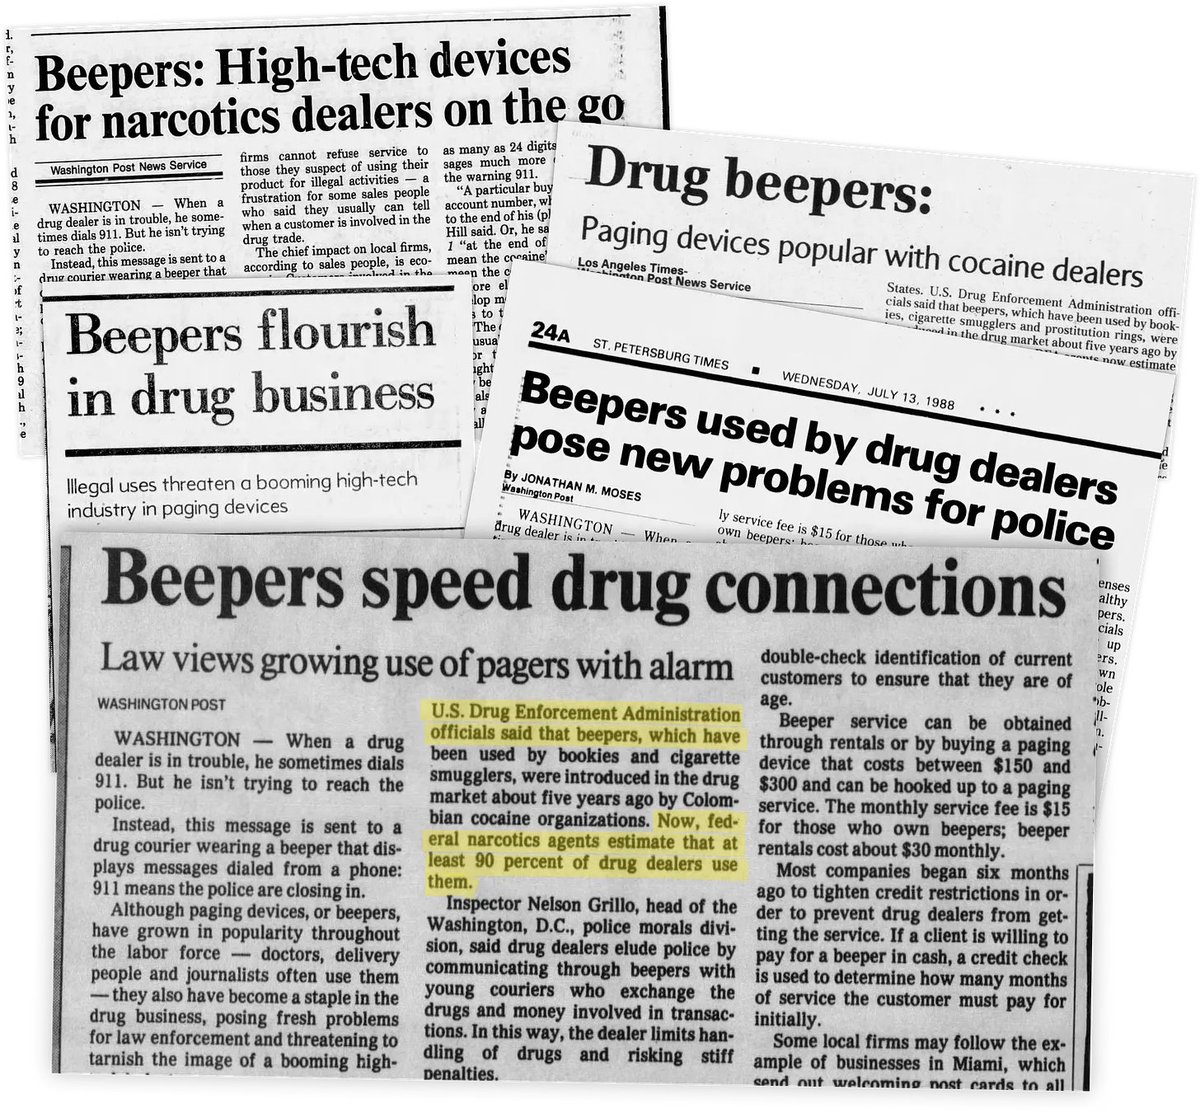 🧵 The Forgotten War on Beepers newsletter.pessimistsarchive.org/p/the-forgotte… 📟 Through the 1980s pagers became popular with young people, and also... drug dealers. This dragged beepers into a moral panic about adolescent drug use...